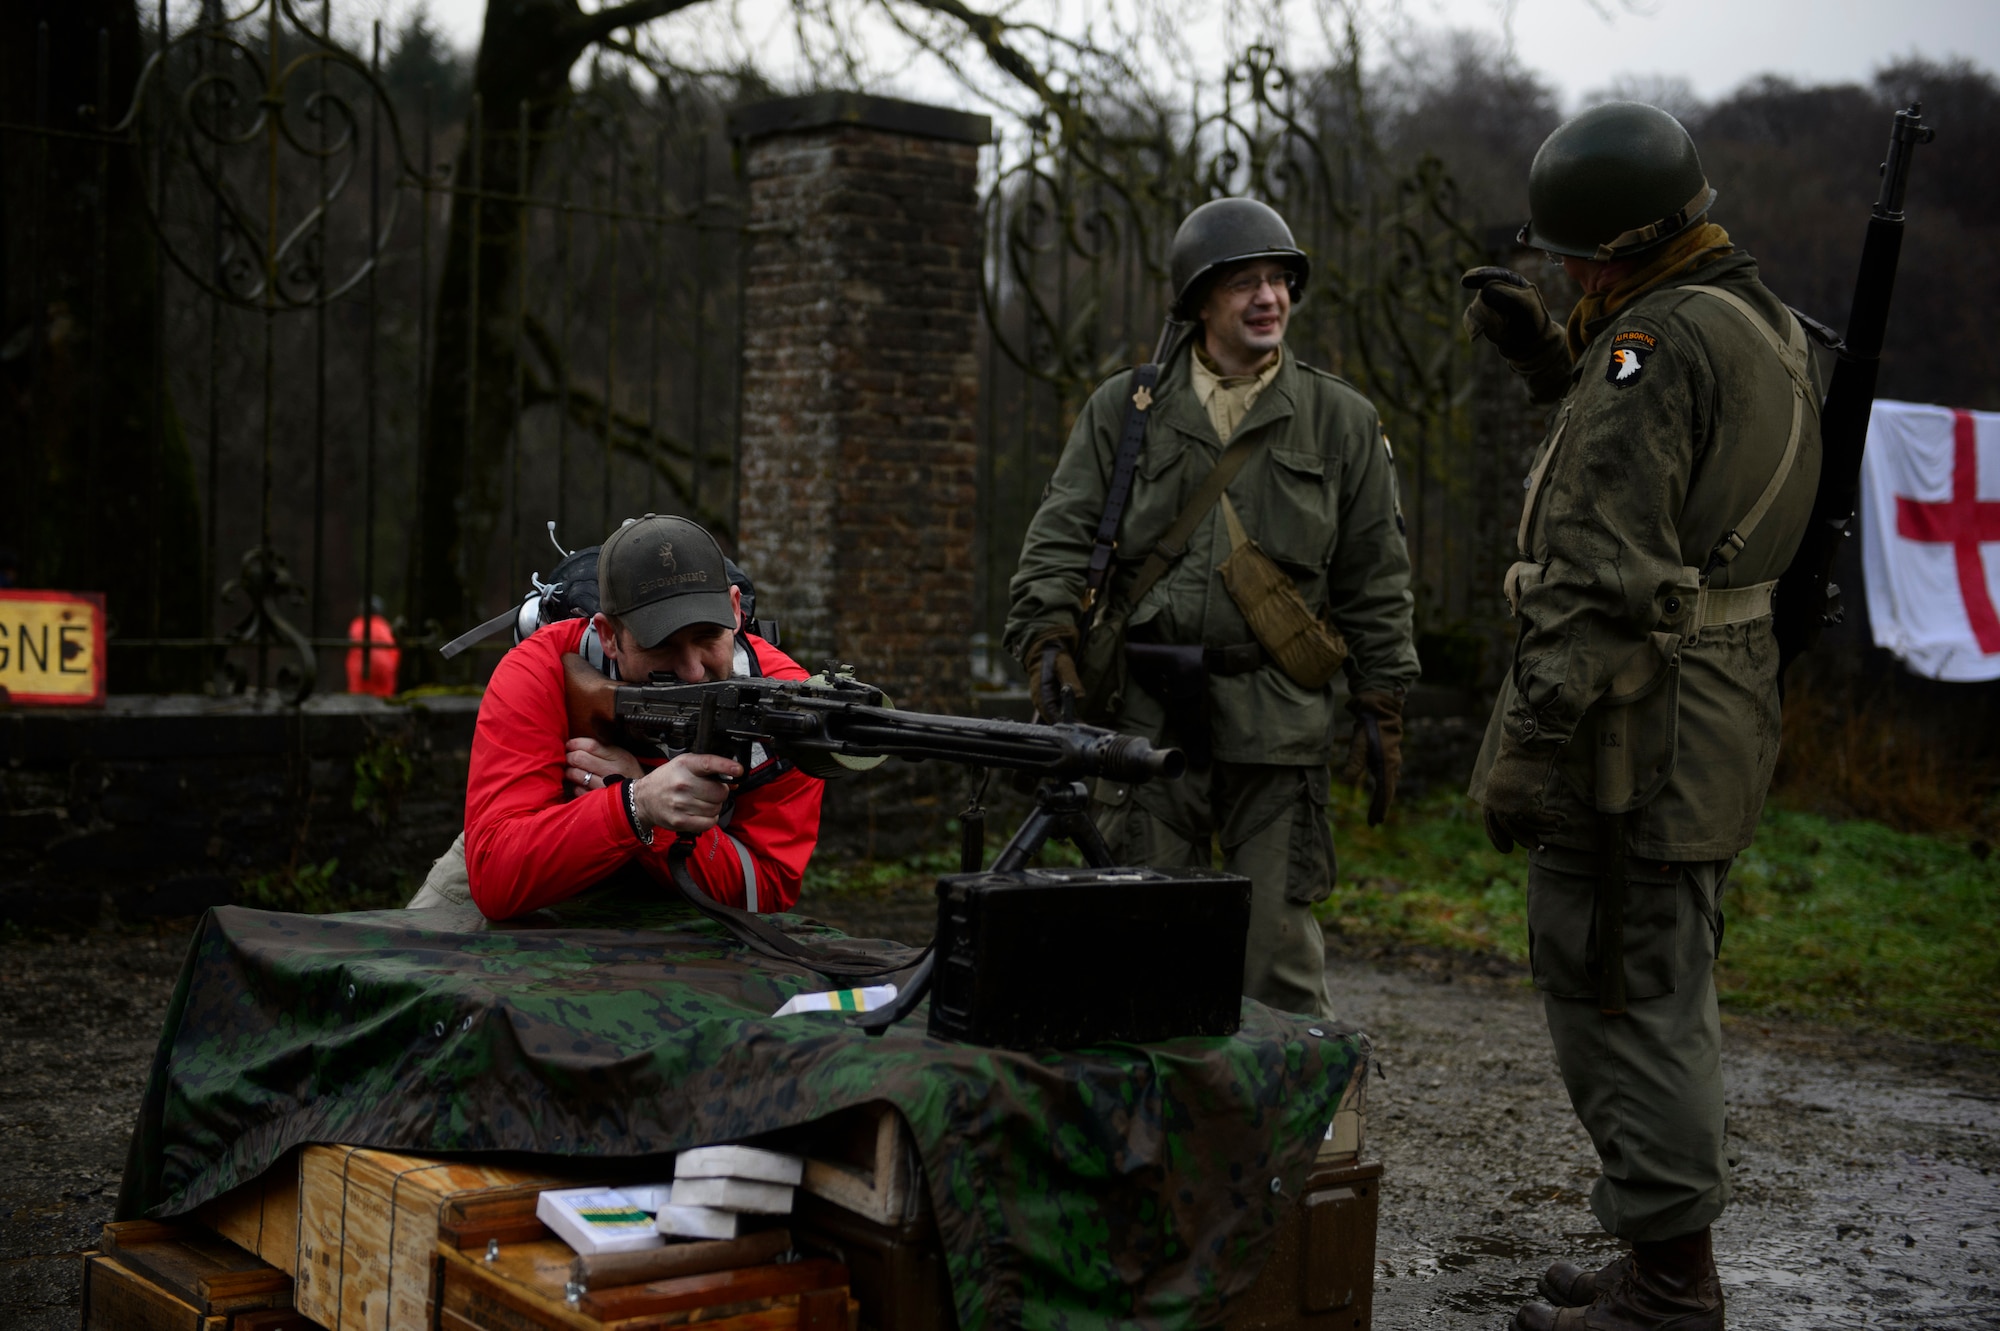 BASTOGNE, Belgium – U.S. Air Force Master Sgt. Kenneth Snyder, 52nd Fighter Wing command post, aims down the sights of a German-made machine gun during the Bastogne Historic Walk Dec. 15, 2012. Bastogne is about 110 kilometers from Spangdahlem Air Base, Germany, and has many monuments and memorials about World War II in the area. (U.S. Air Force photo by Staff Sgt. Nathanael Callon/Released)